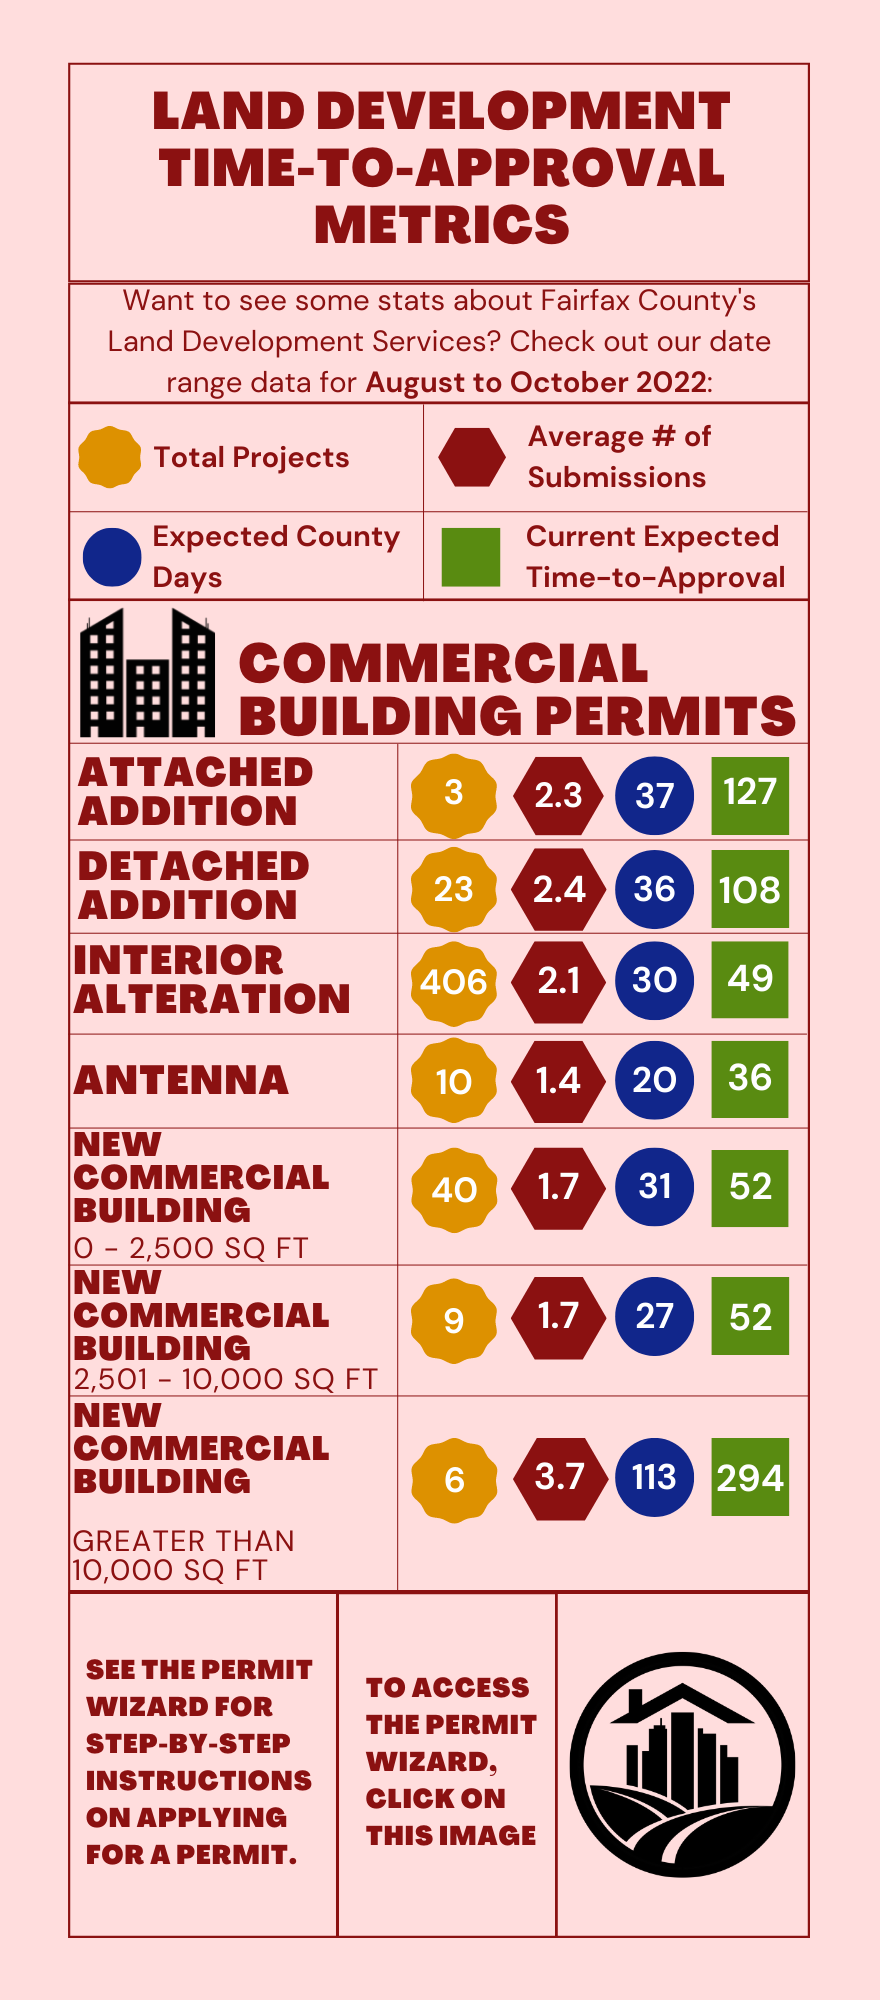 Commercial Building Permits Time-to-Approval